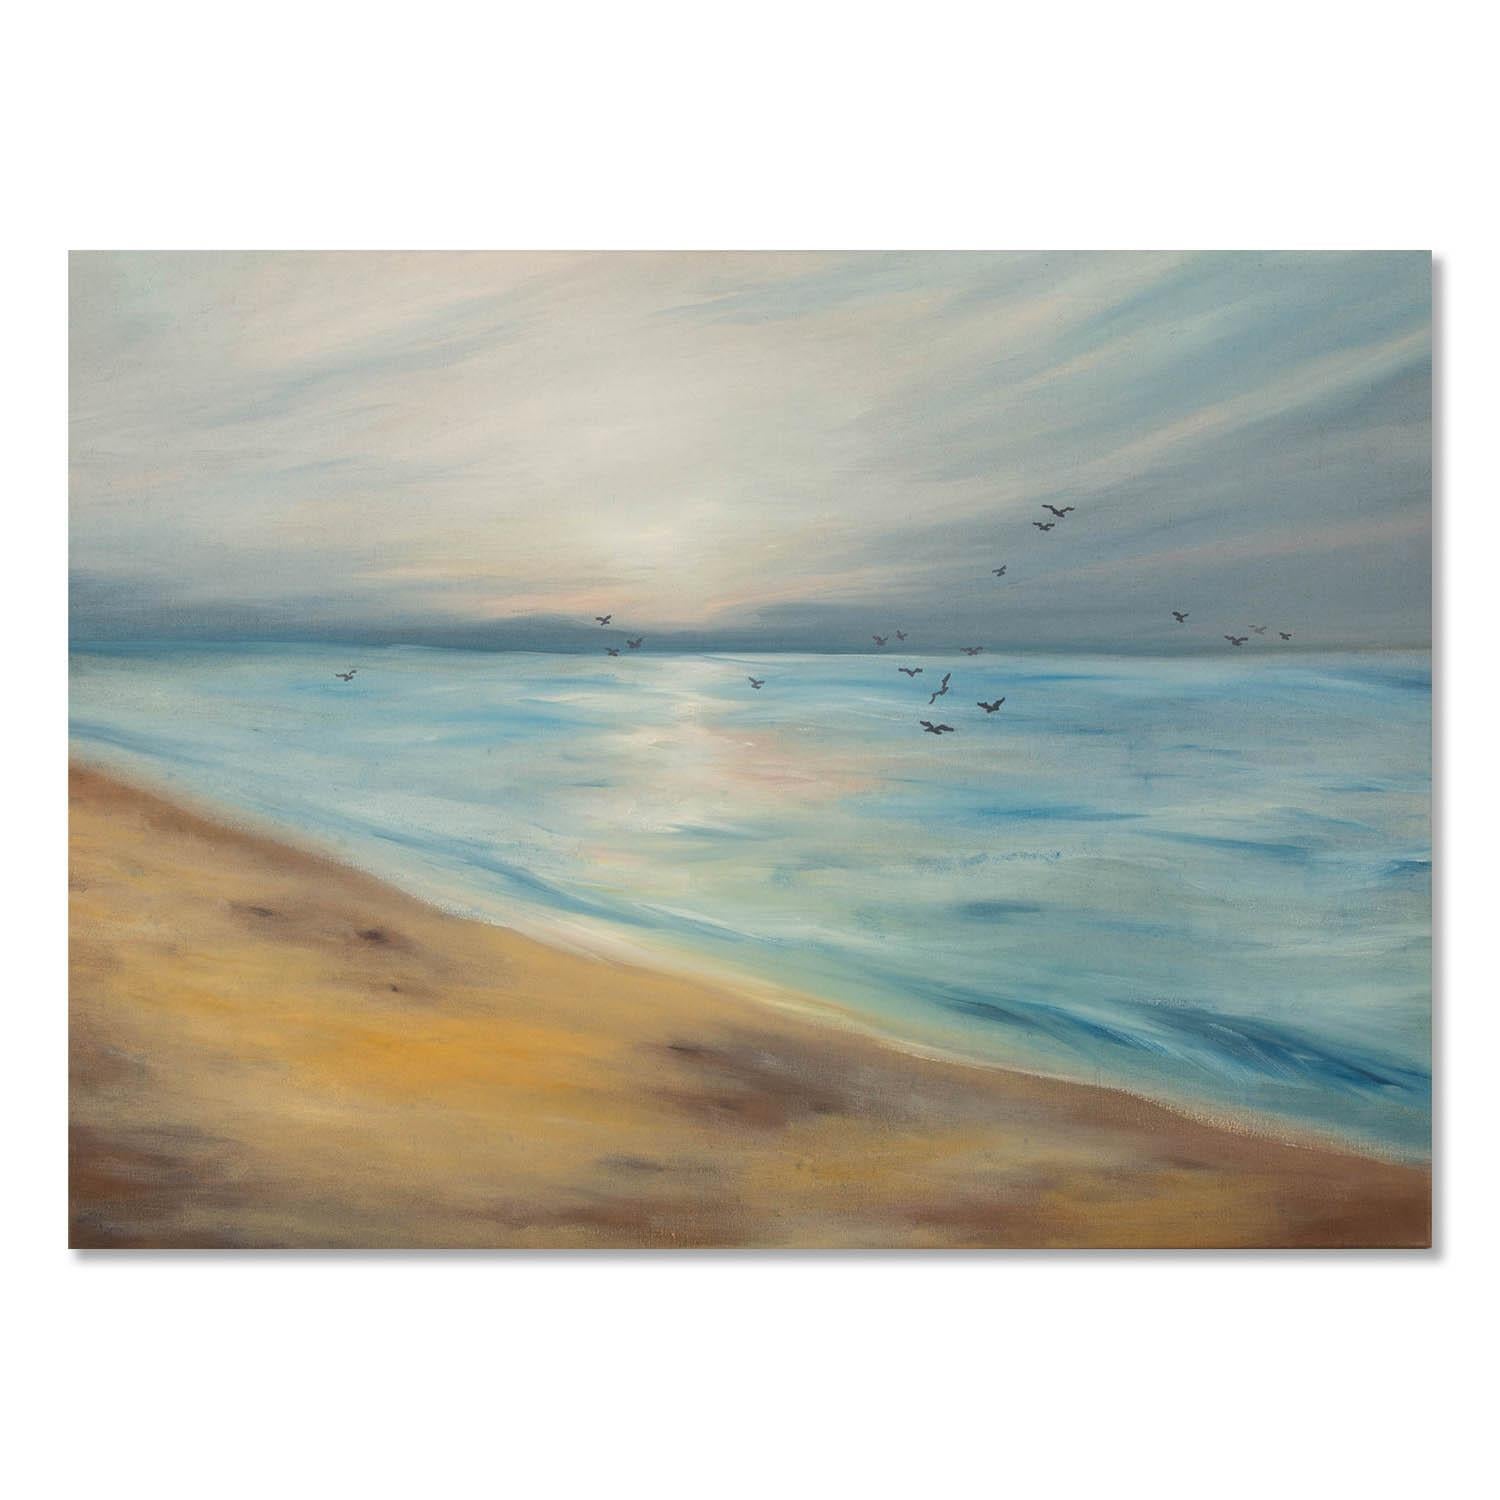  Title: Beach And Wave
 Medium: Oil on canvas
 Size: 22 x 30 inches
 Frame: Framing options available!
 Condition: The painting appears to be in excellent condition.
 
 Year: 2000 Circa
 Artist: Jianping Chen
 Signature: Signed
 Signature Location: